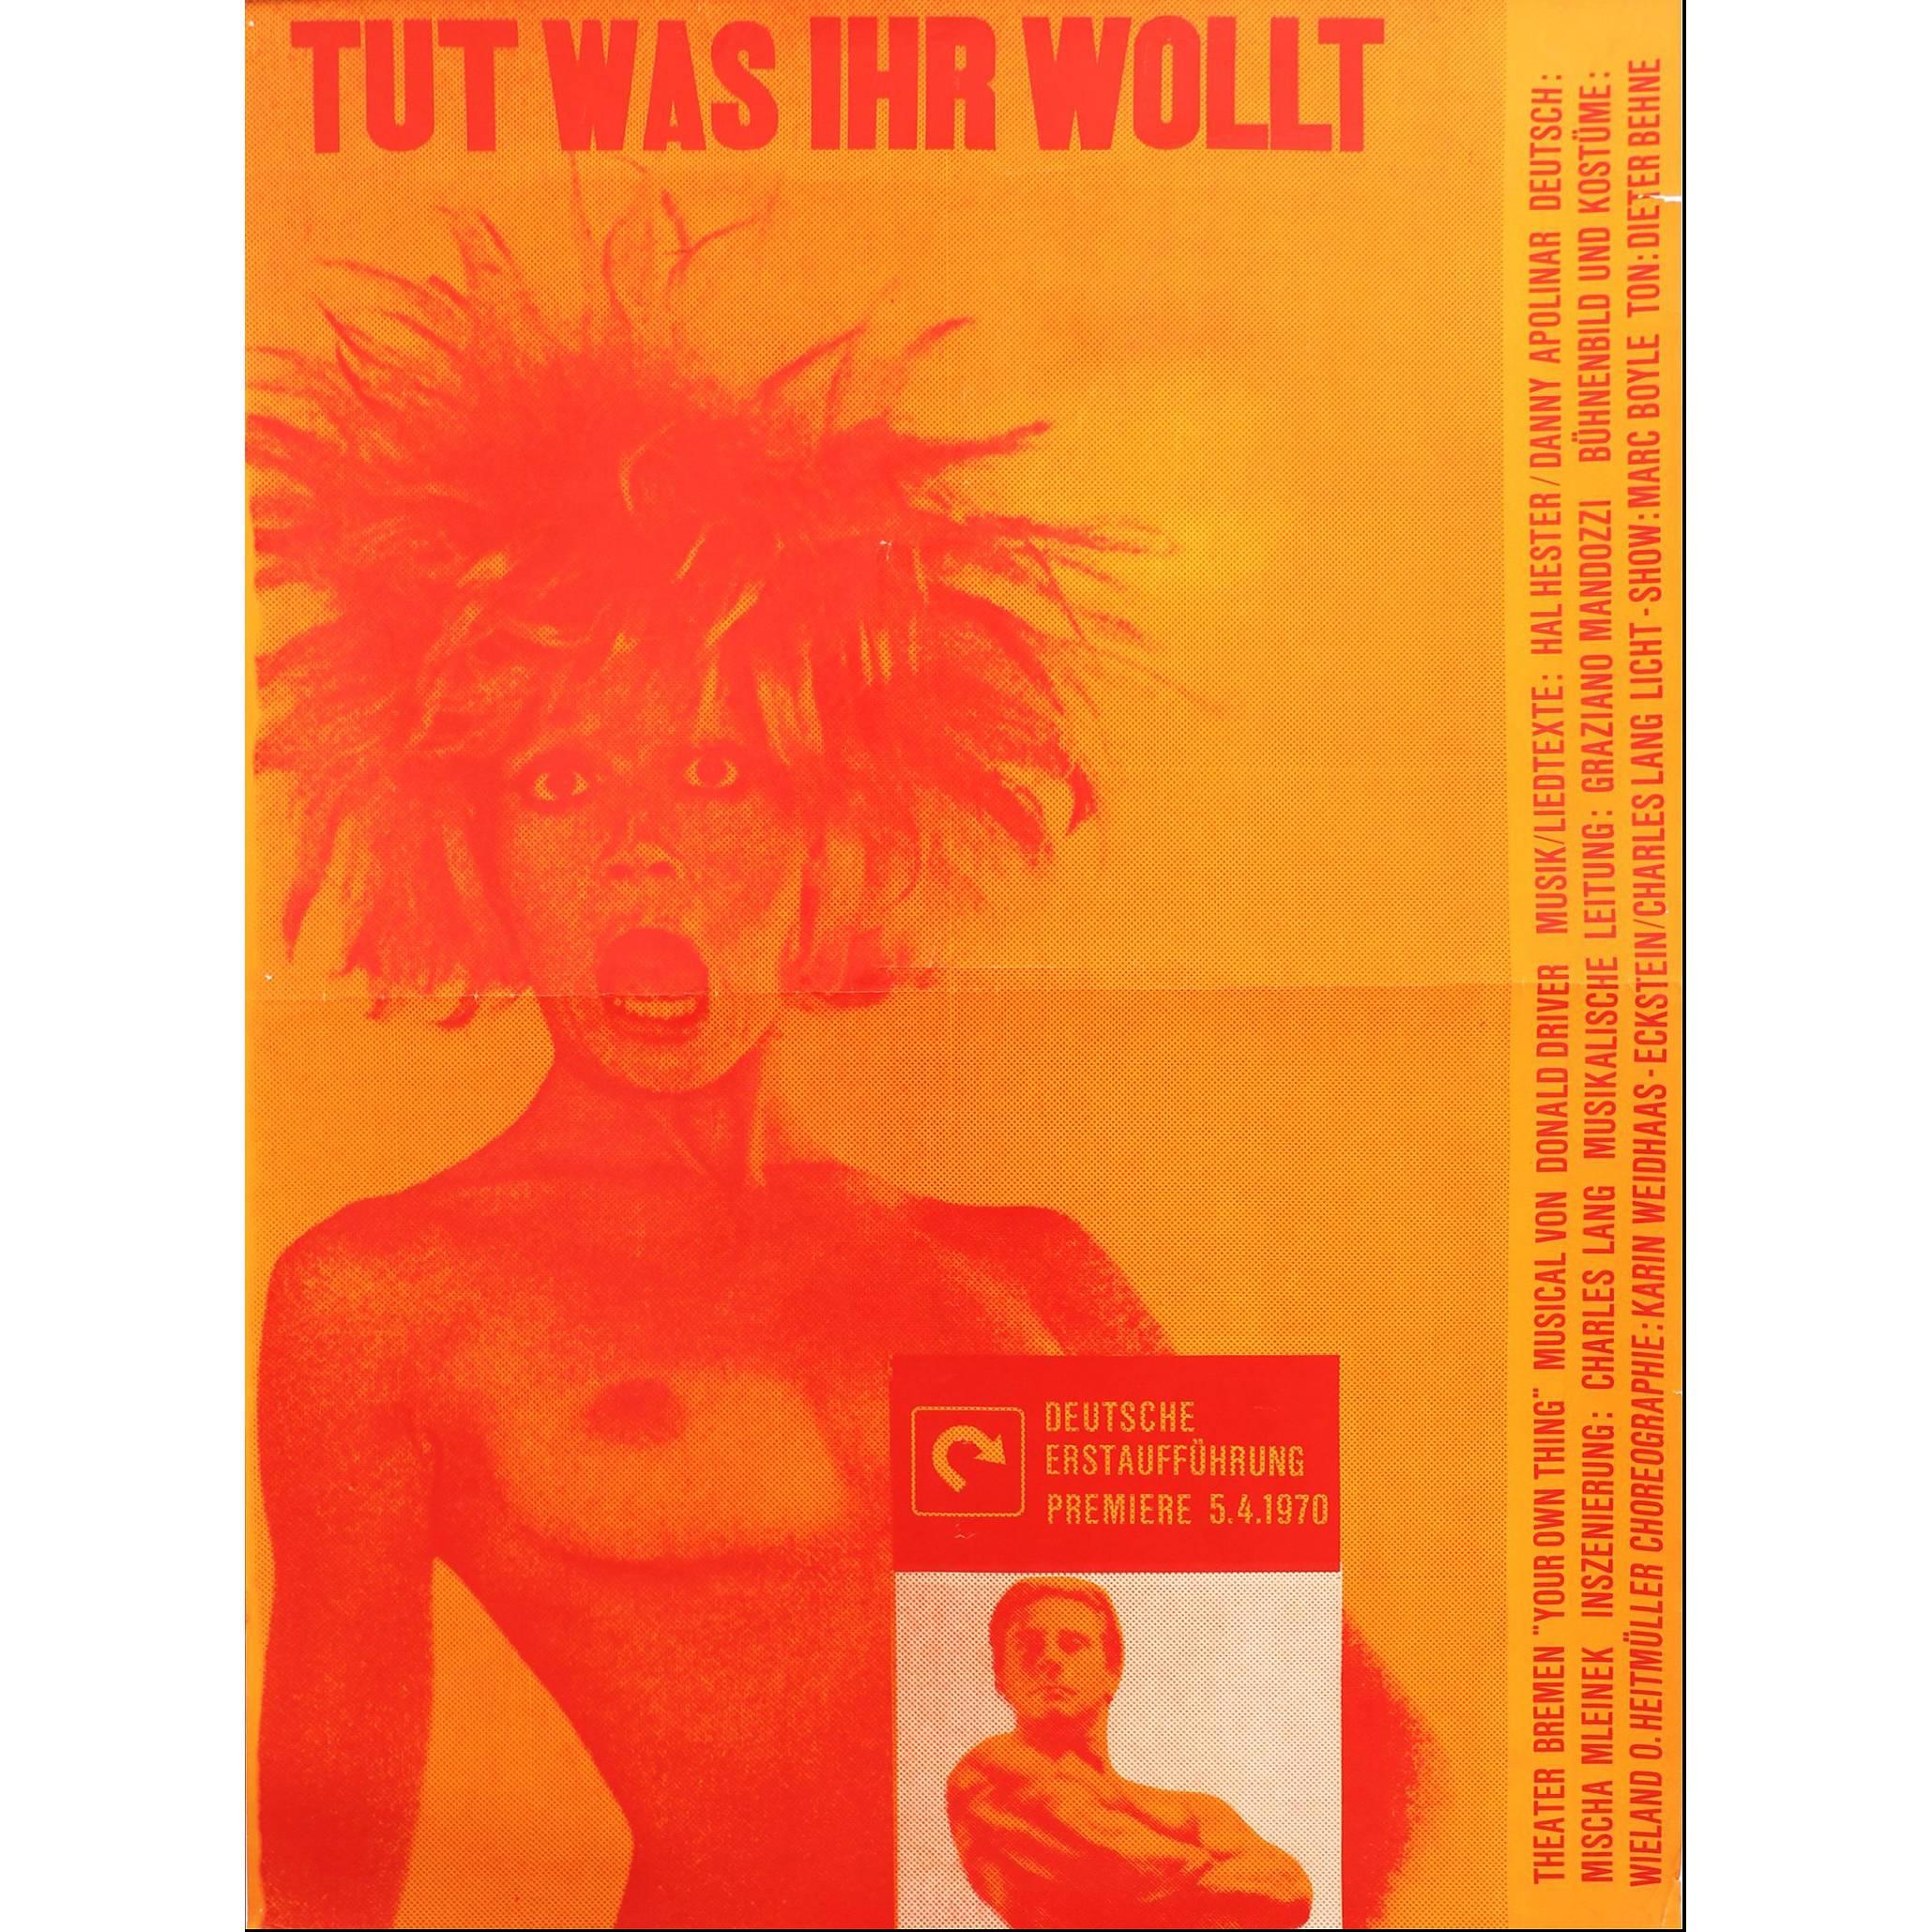 Your Own Thing 'Tut, was ihr wollt' German Poster Rock Musical Hal Hester, 1970 For Sale